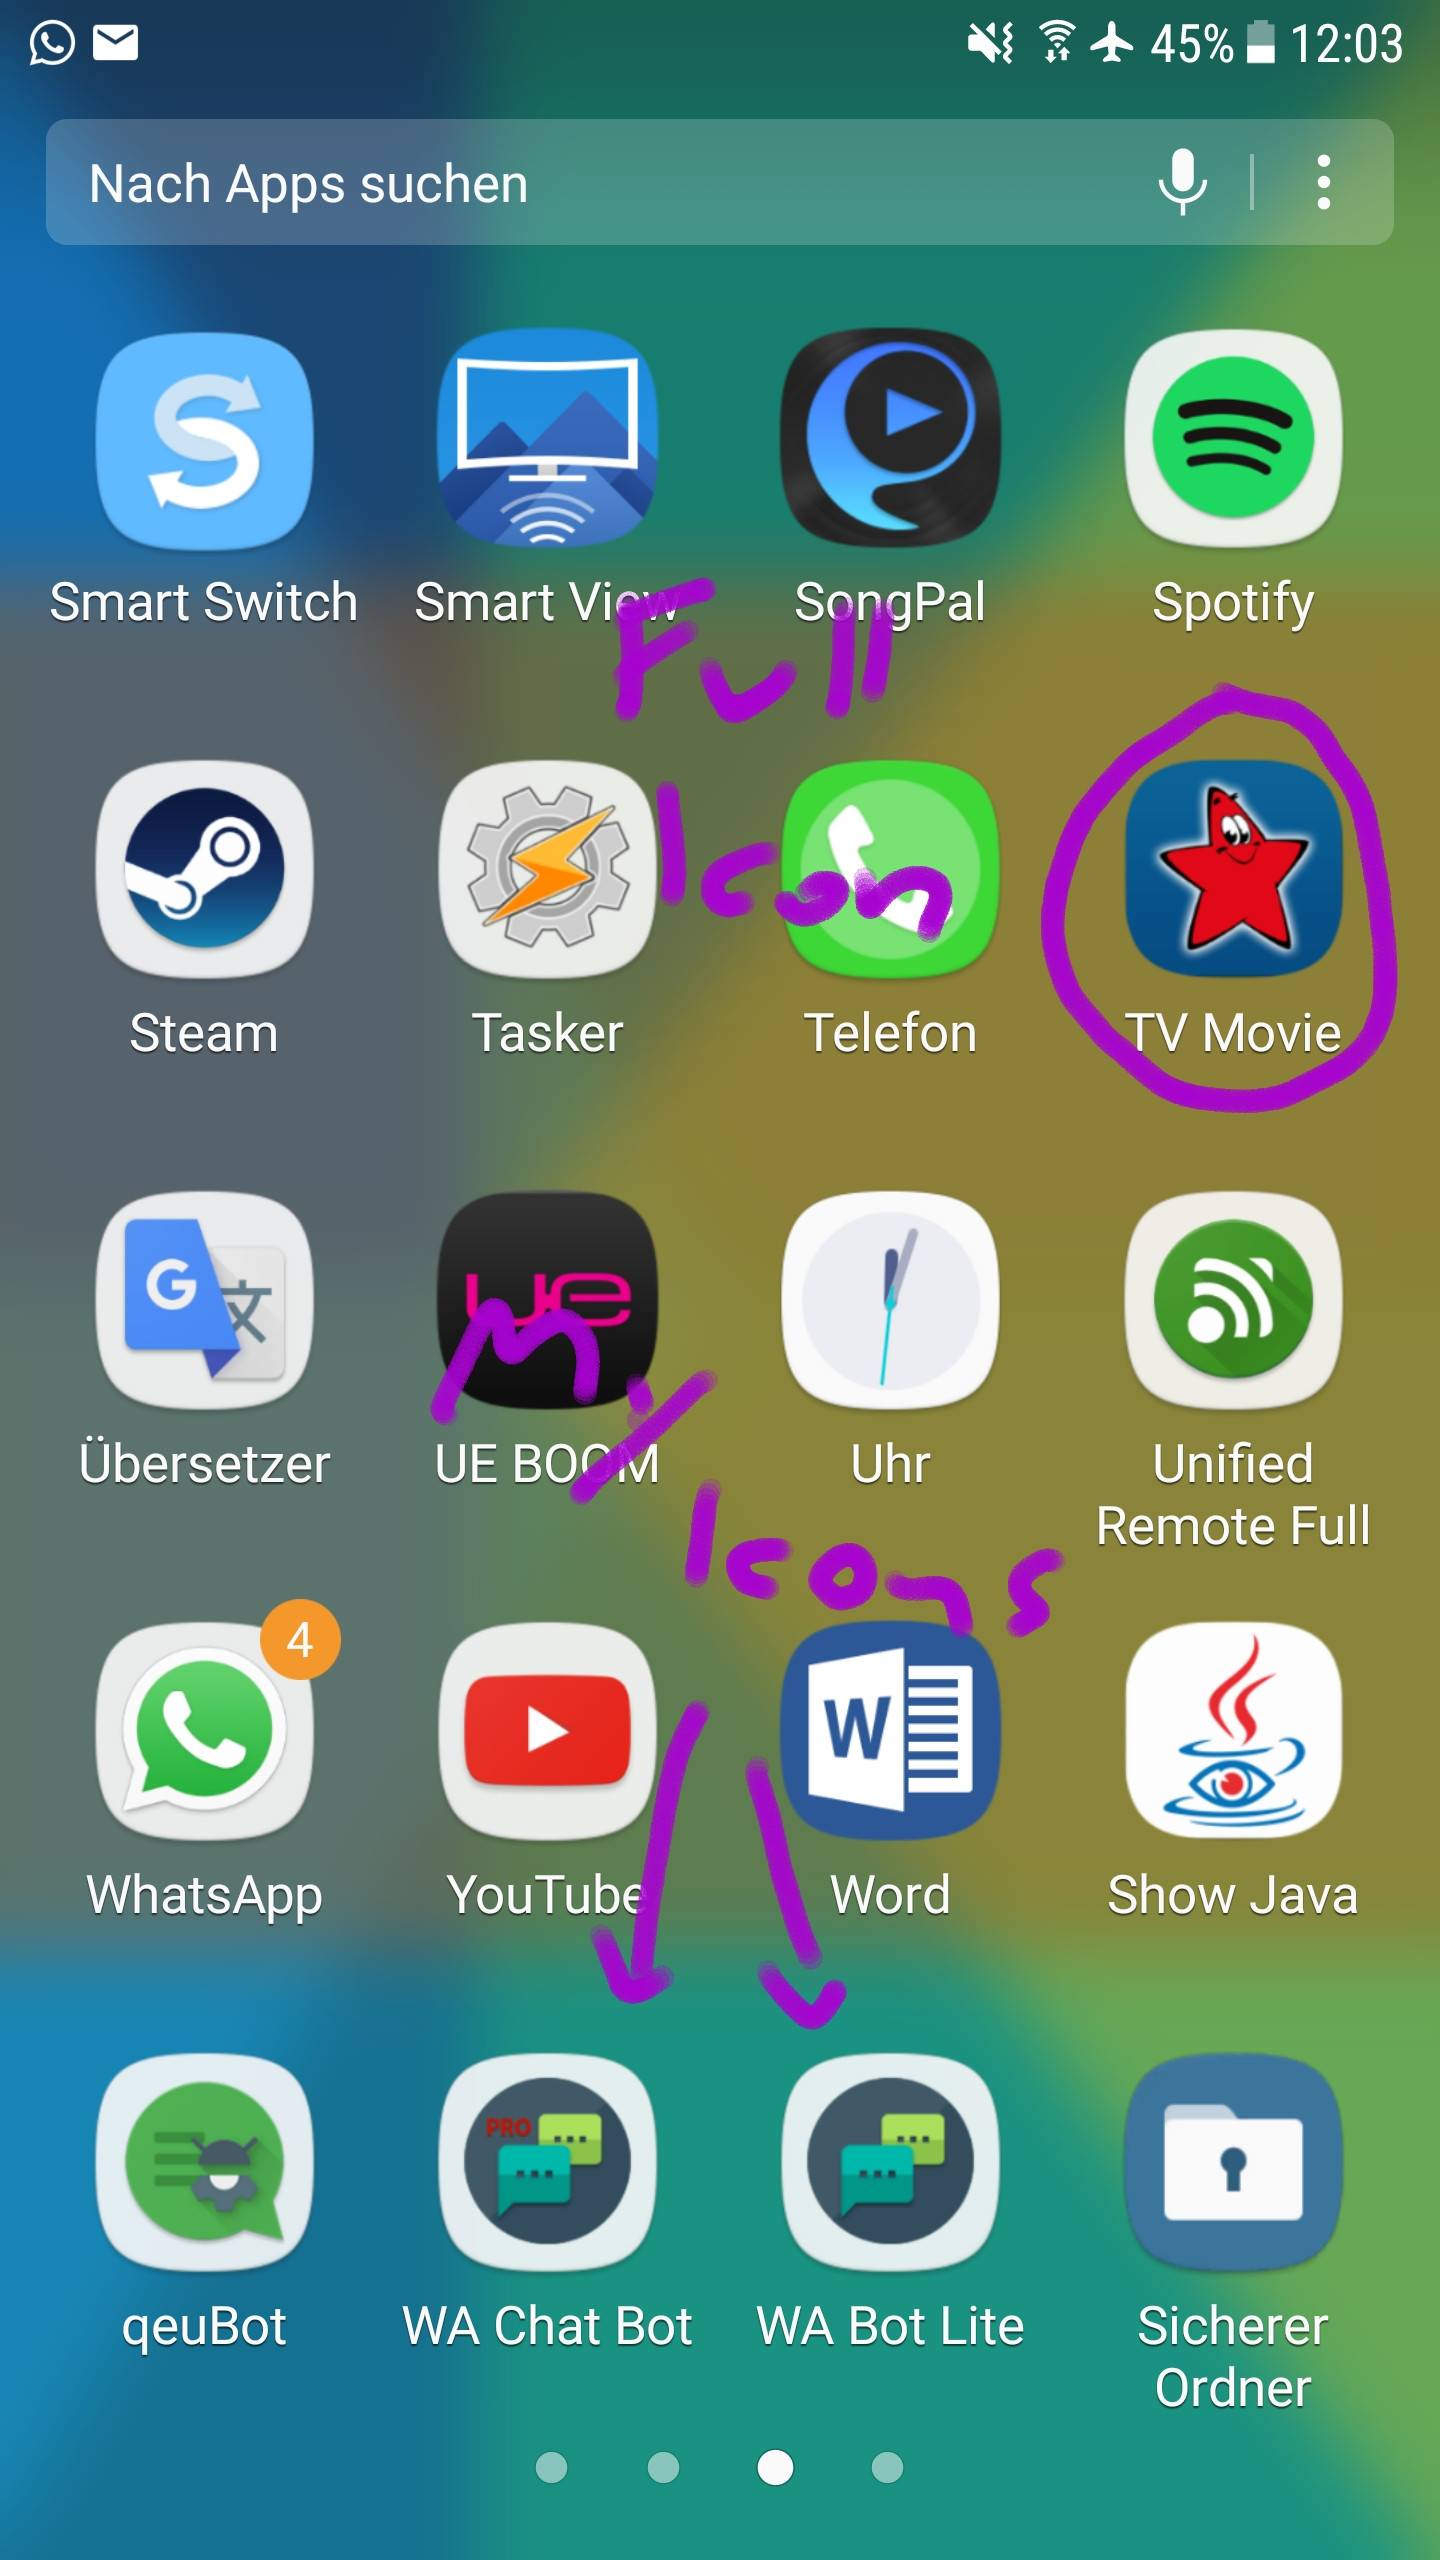 My app's icon and the icon of another App from Google Play